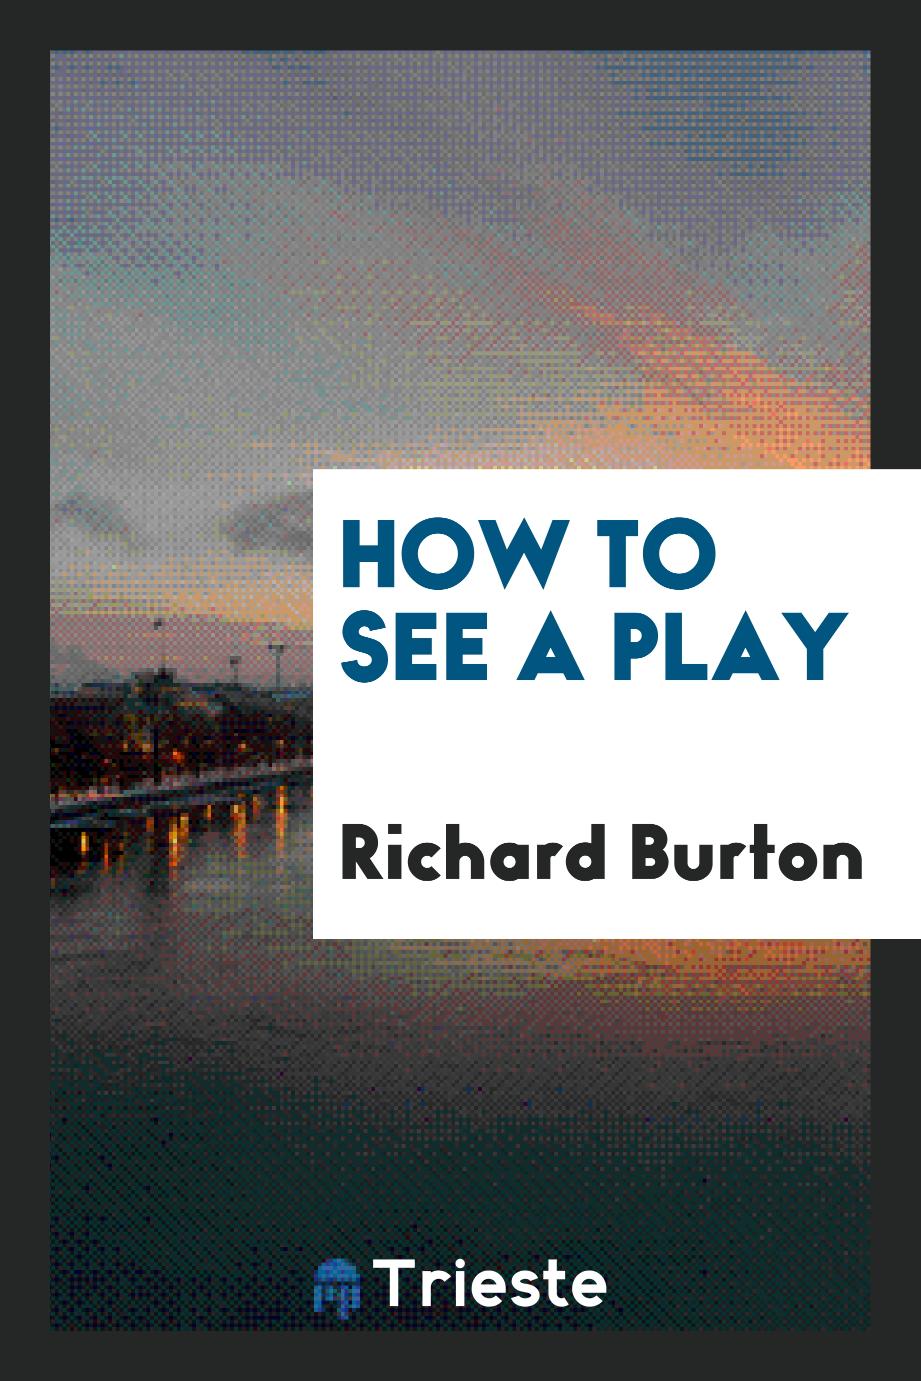 How to see a play